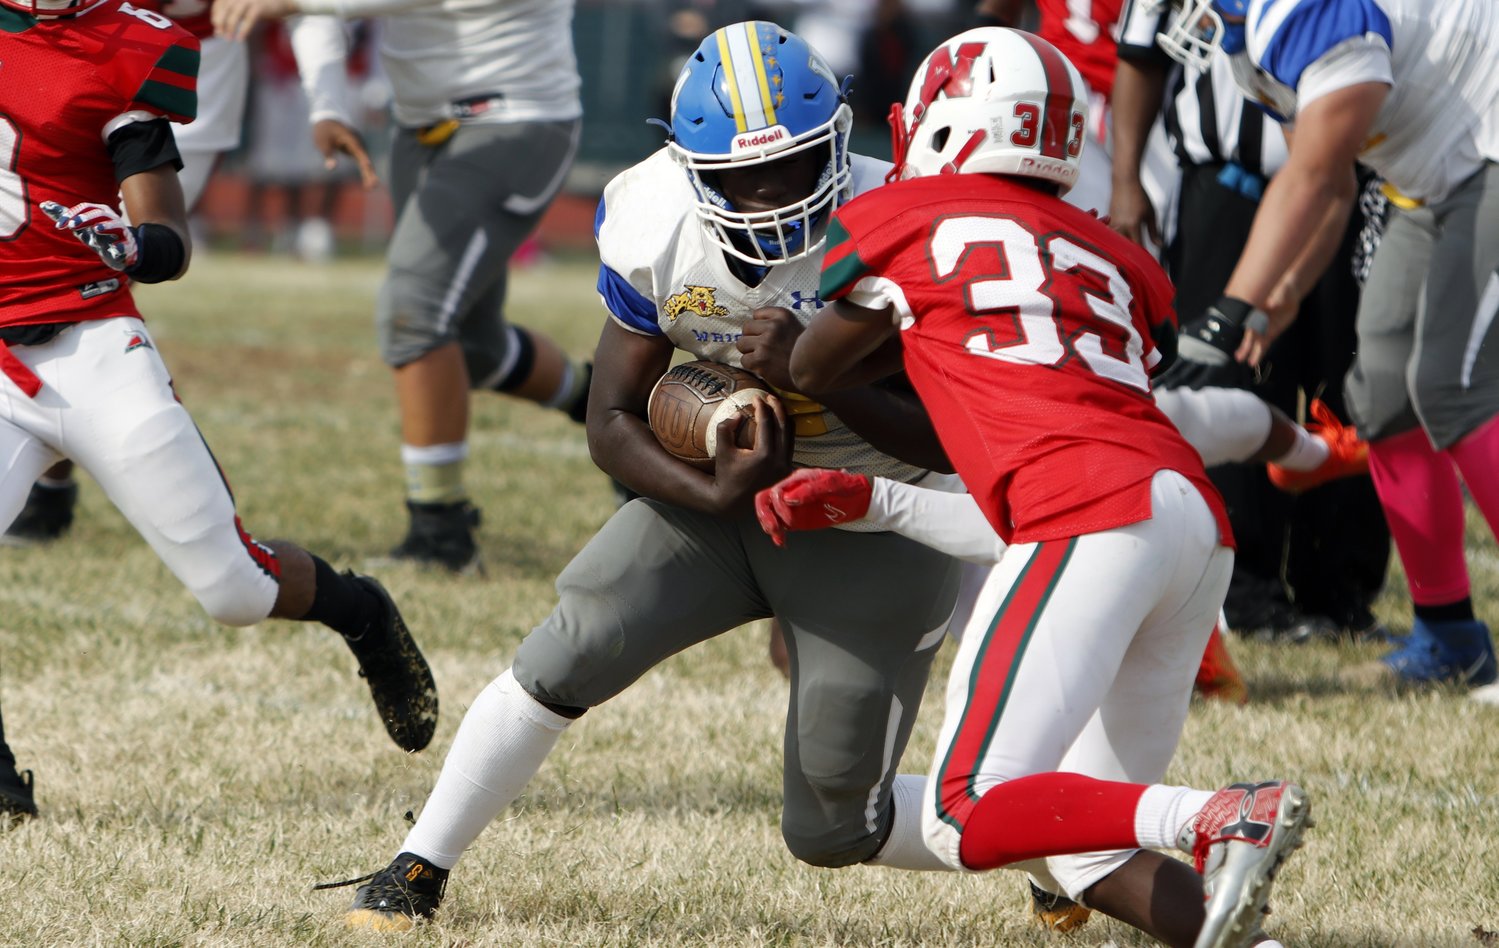 Carleon Jones (left) lowers his shoulder before scoring the go-ahead touchdown in the fourth quarter of Wright City’s win over Normandy Saturday.